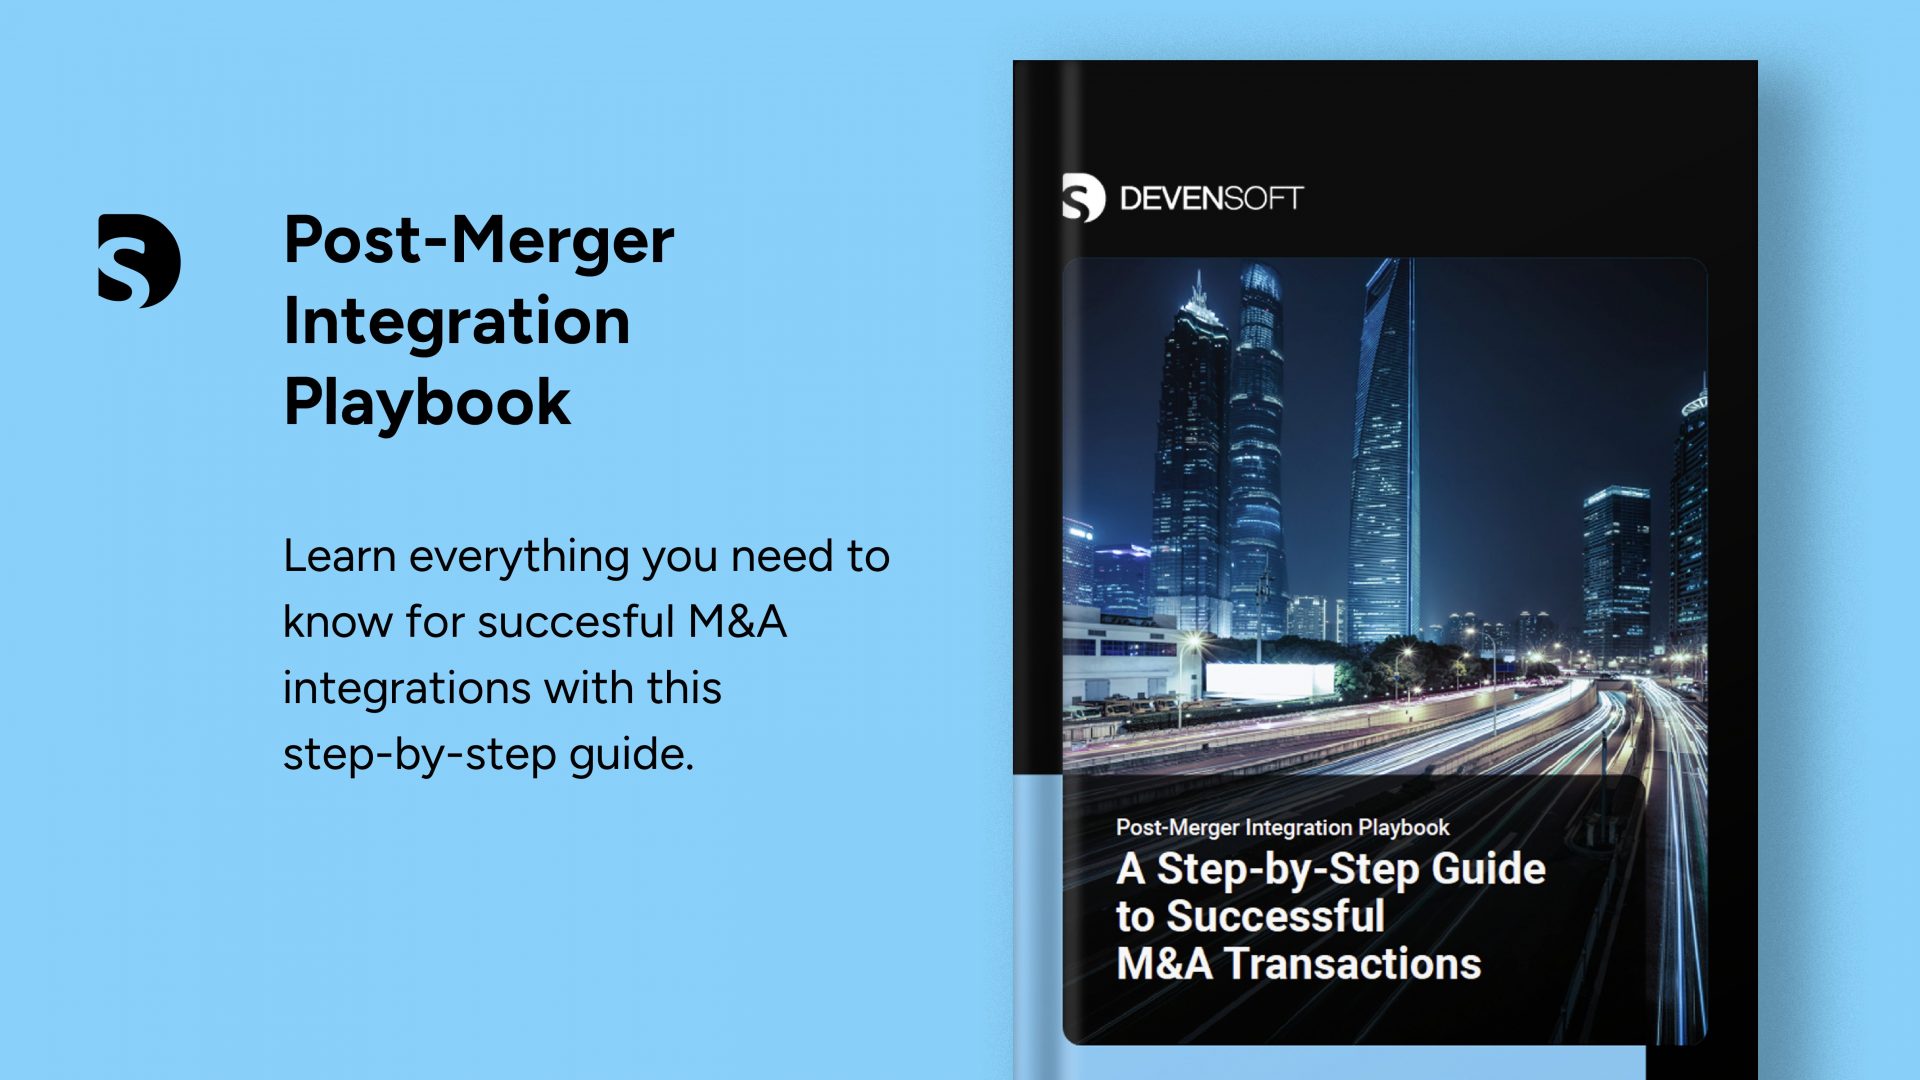 Post-Merger Integration Playbook: A Step-by-Step Guide to Successful M&A Transactions